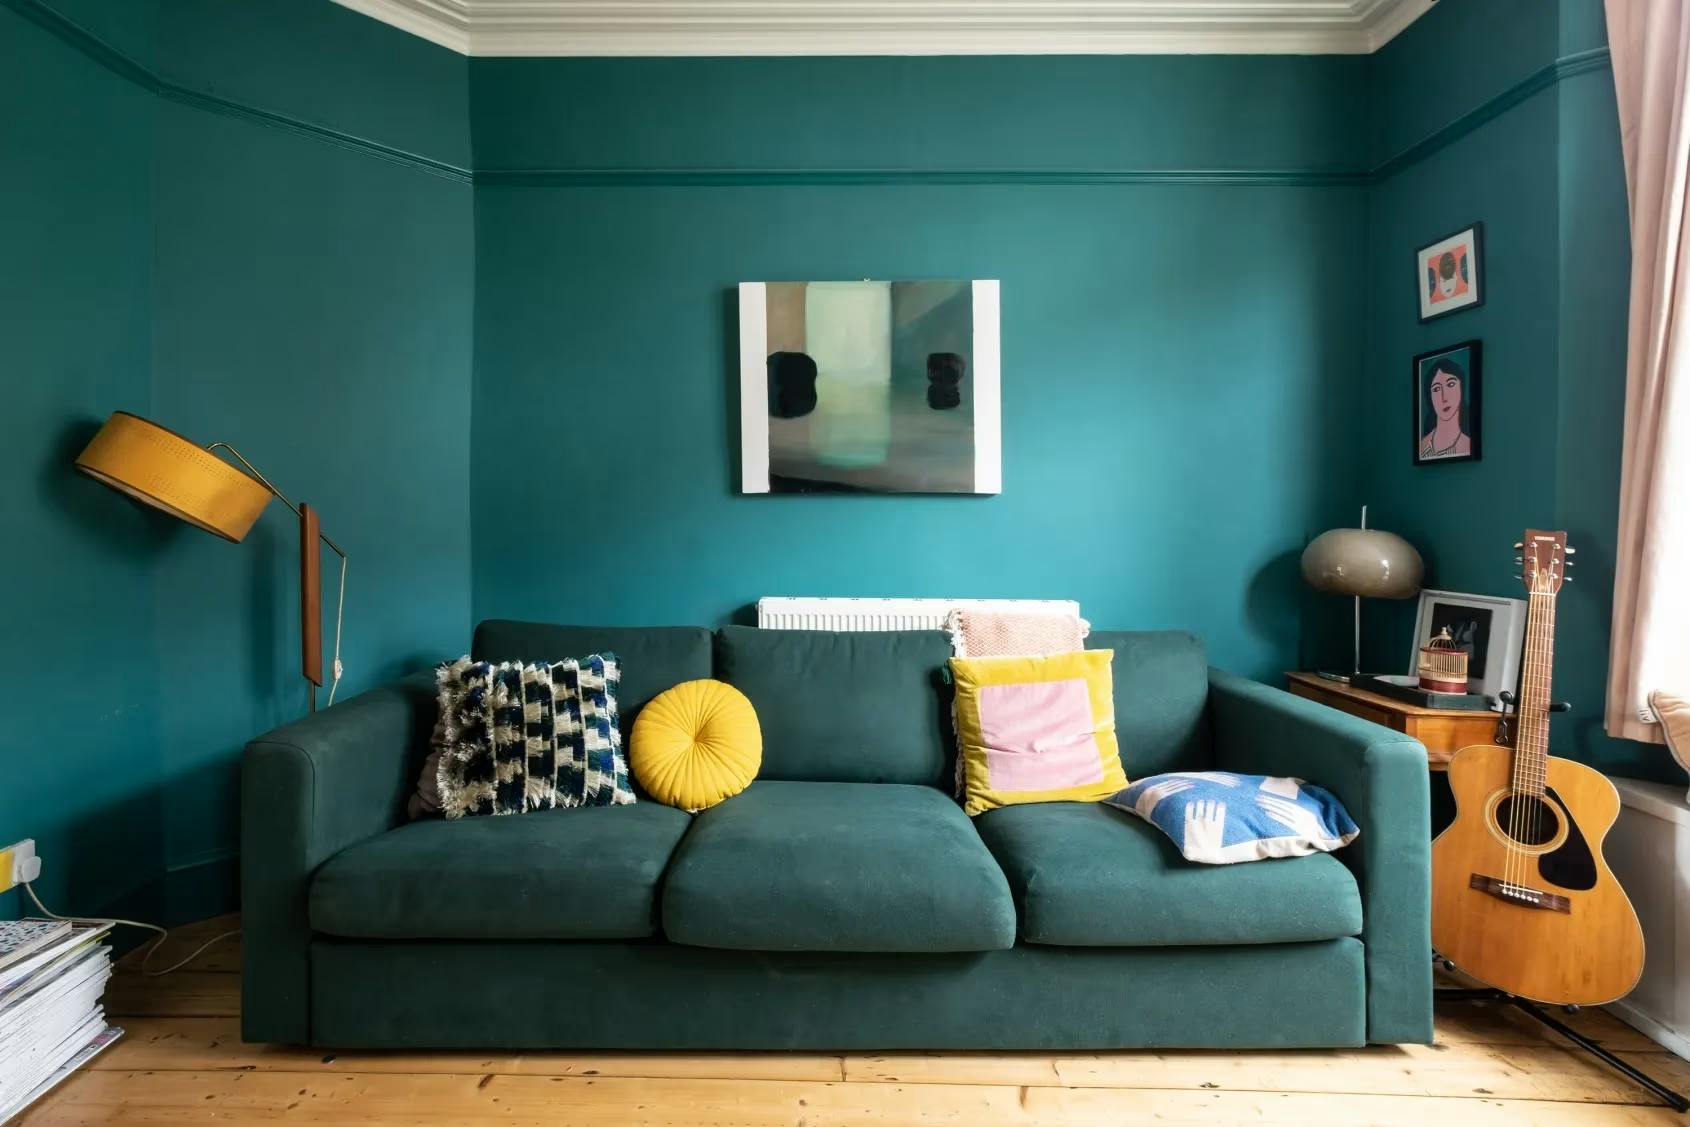 Vardo by Farrow & Ball, featured in Apartment Therapy, photo by Viv Yapp